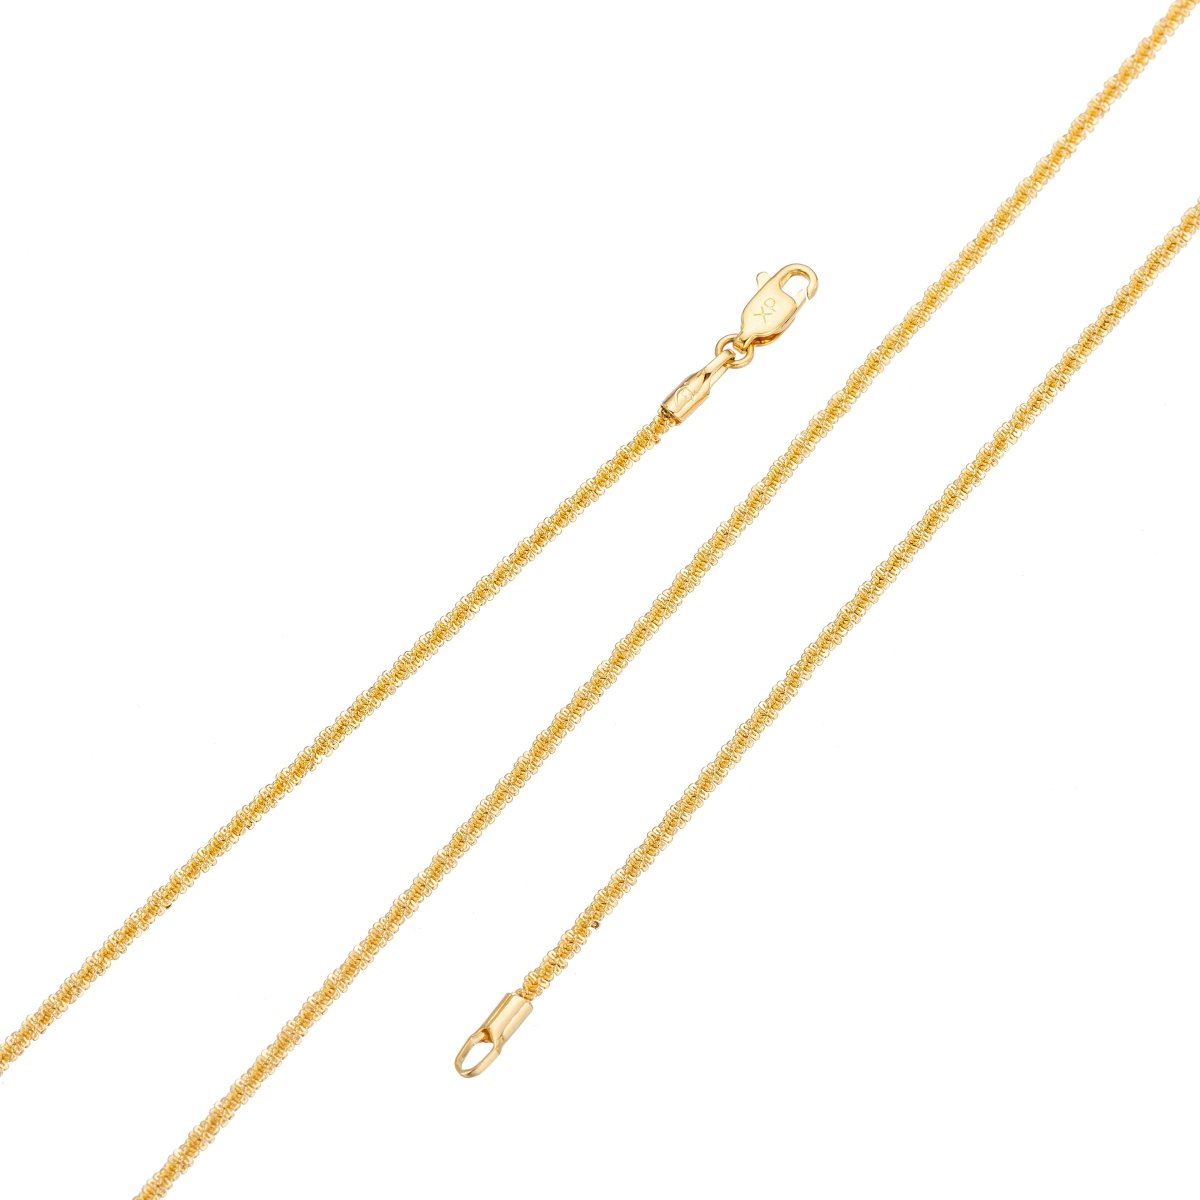 24K Gold Filled Foxtail Wheat Chain Necklace, 20 inch Foxtail Finished Necklace For Jewelry Making, Dainty 2.3mm Foxtail Necklace w/ Lobster Clasps | CN-304 Clearance Pricing - DLUXCA